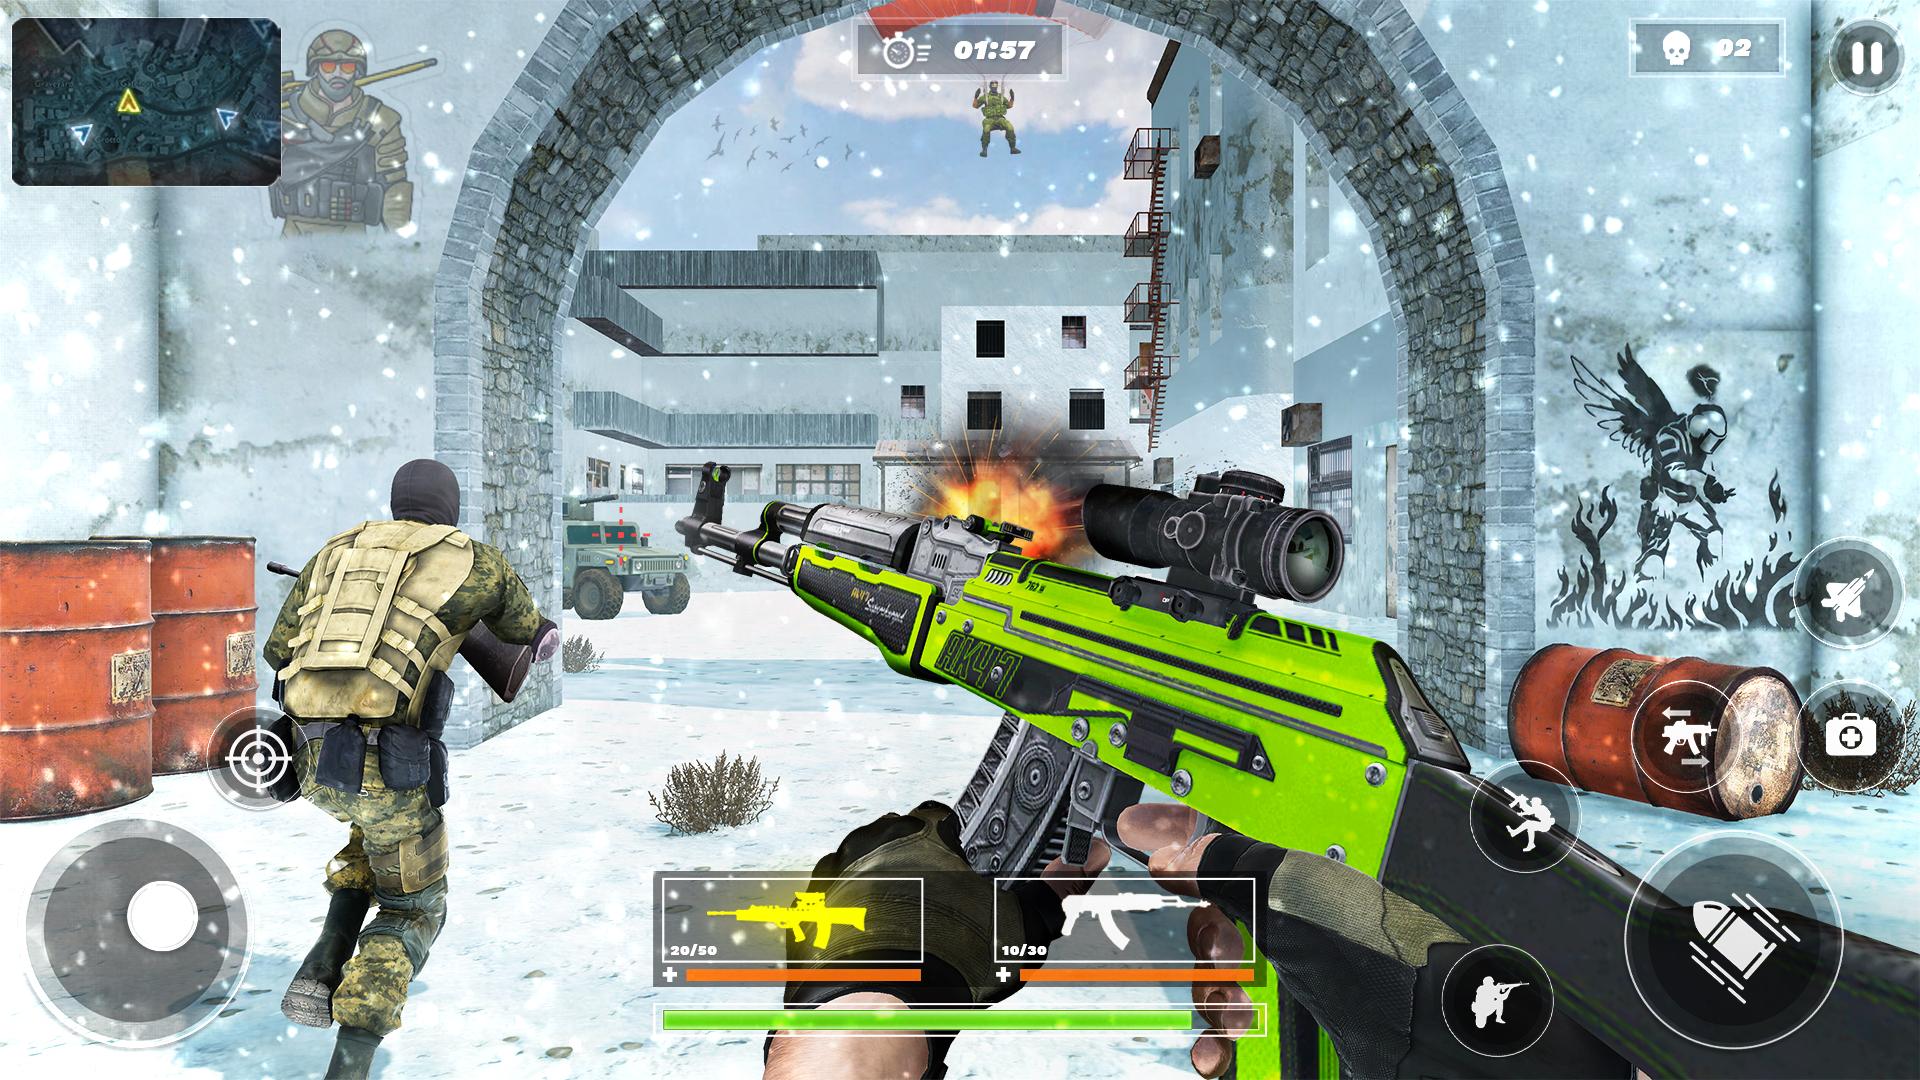 Call Of US Army Commando Mission - Survival Battleground ww2 FPS Duty  Shooting 2022::Appstore for Android